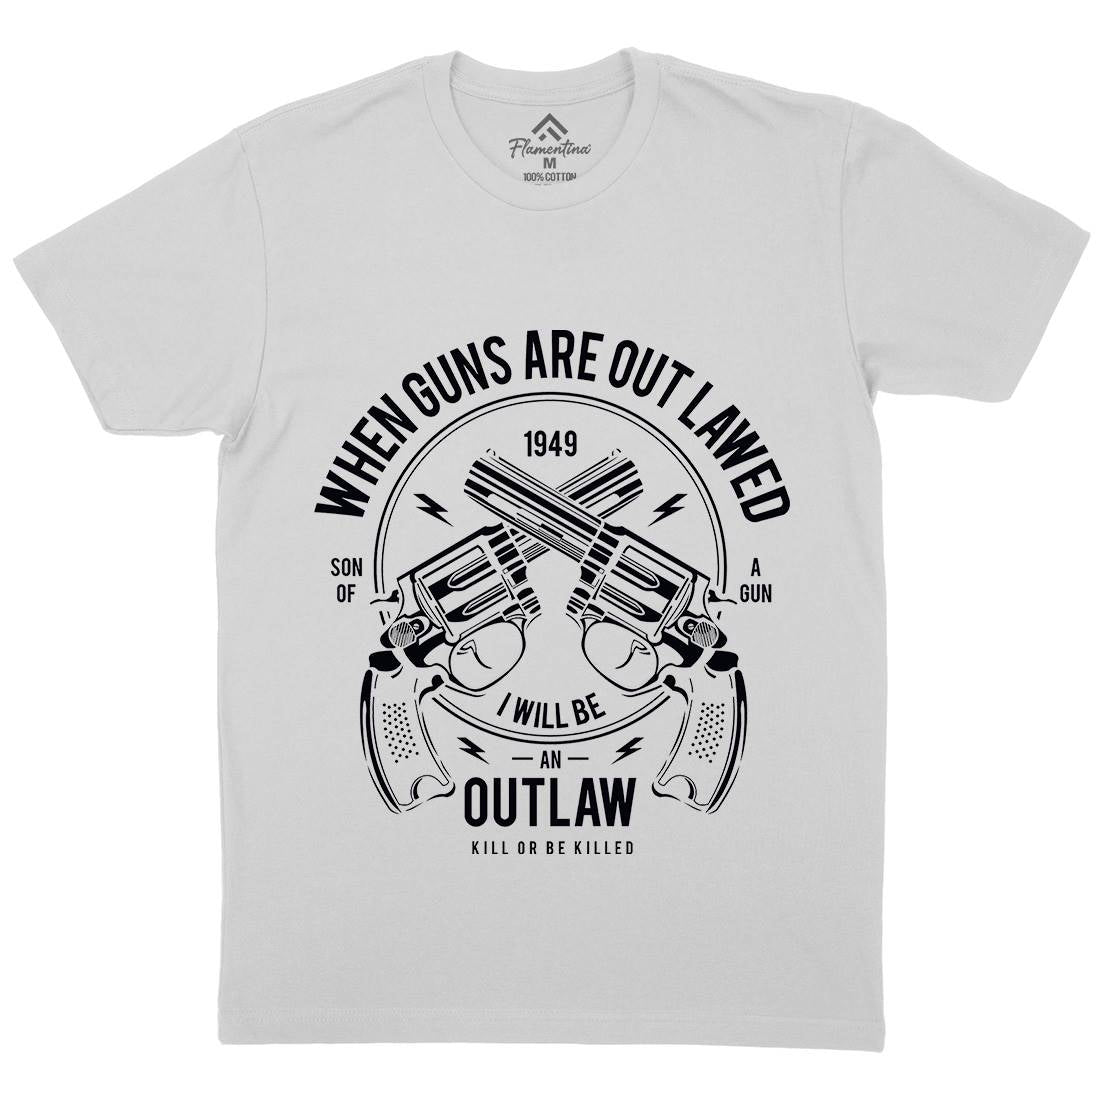 Outlaw Mens Crew Neck T-Shirt American A107